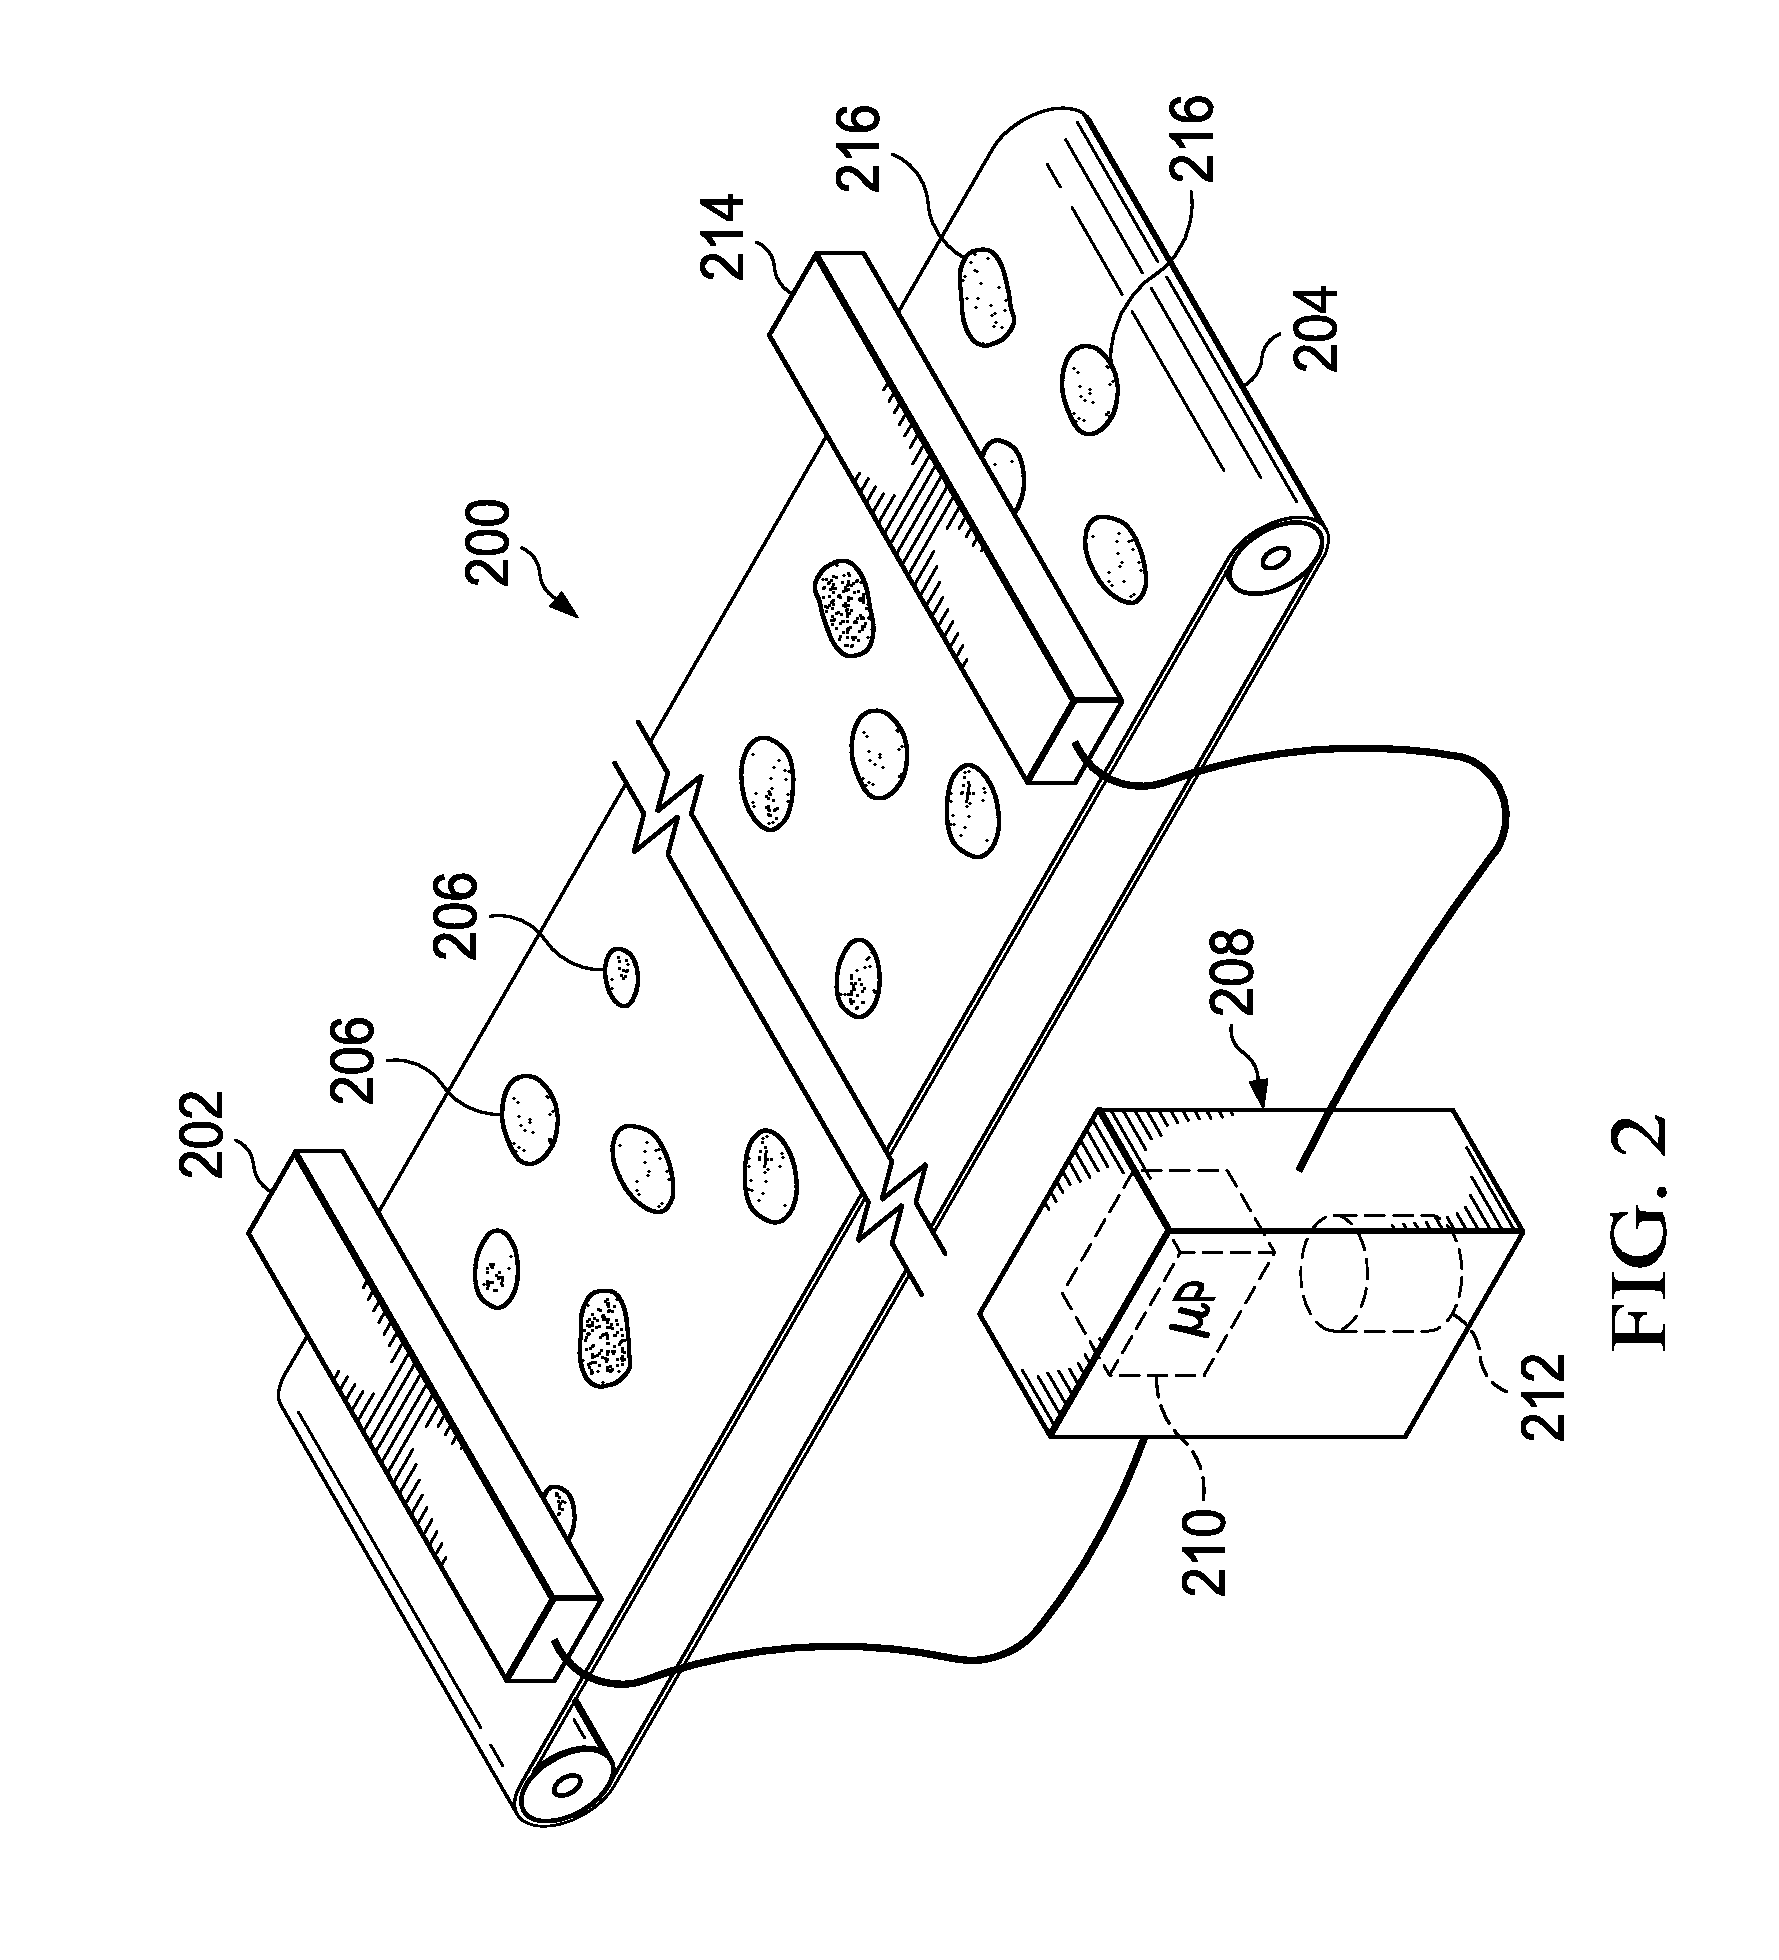 Method for Scoring and Controlling Quality of Food Products in a Dynamic Production Line